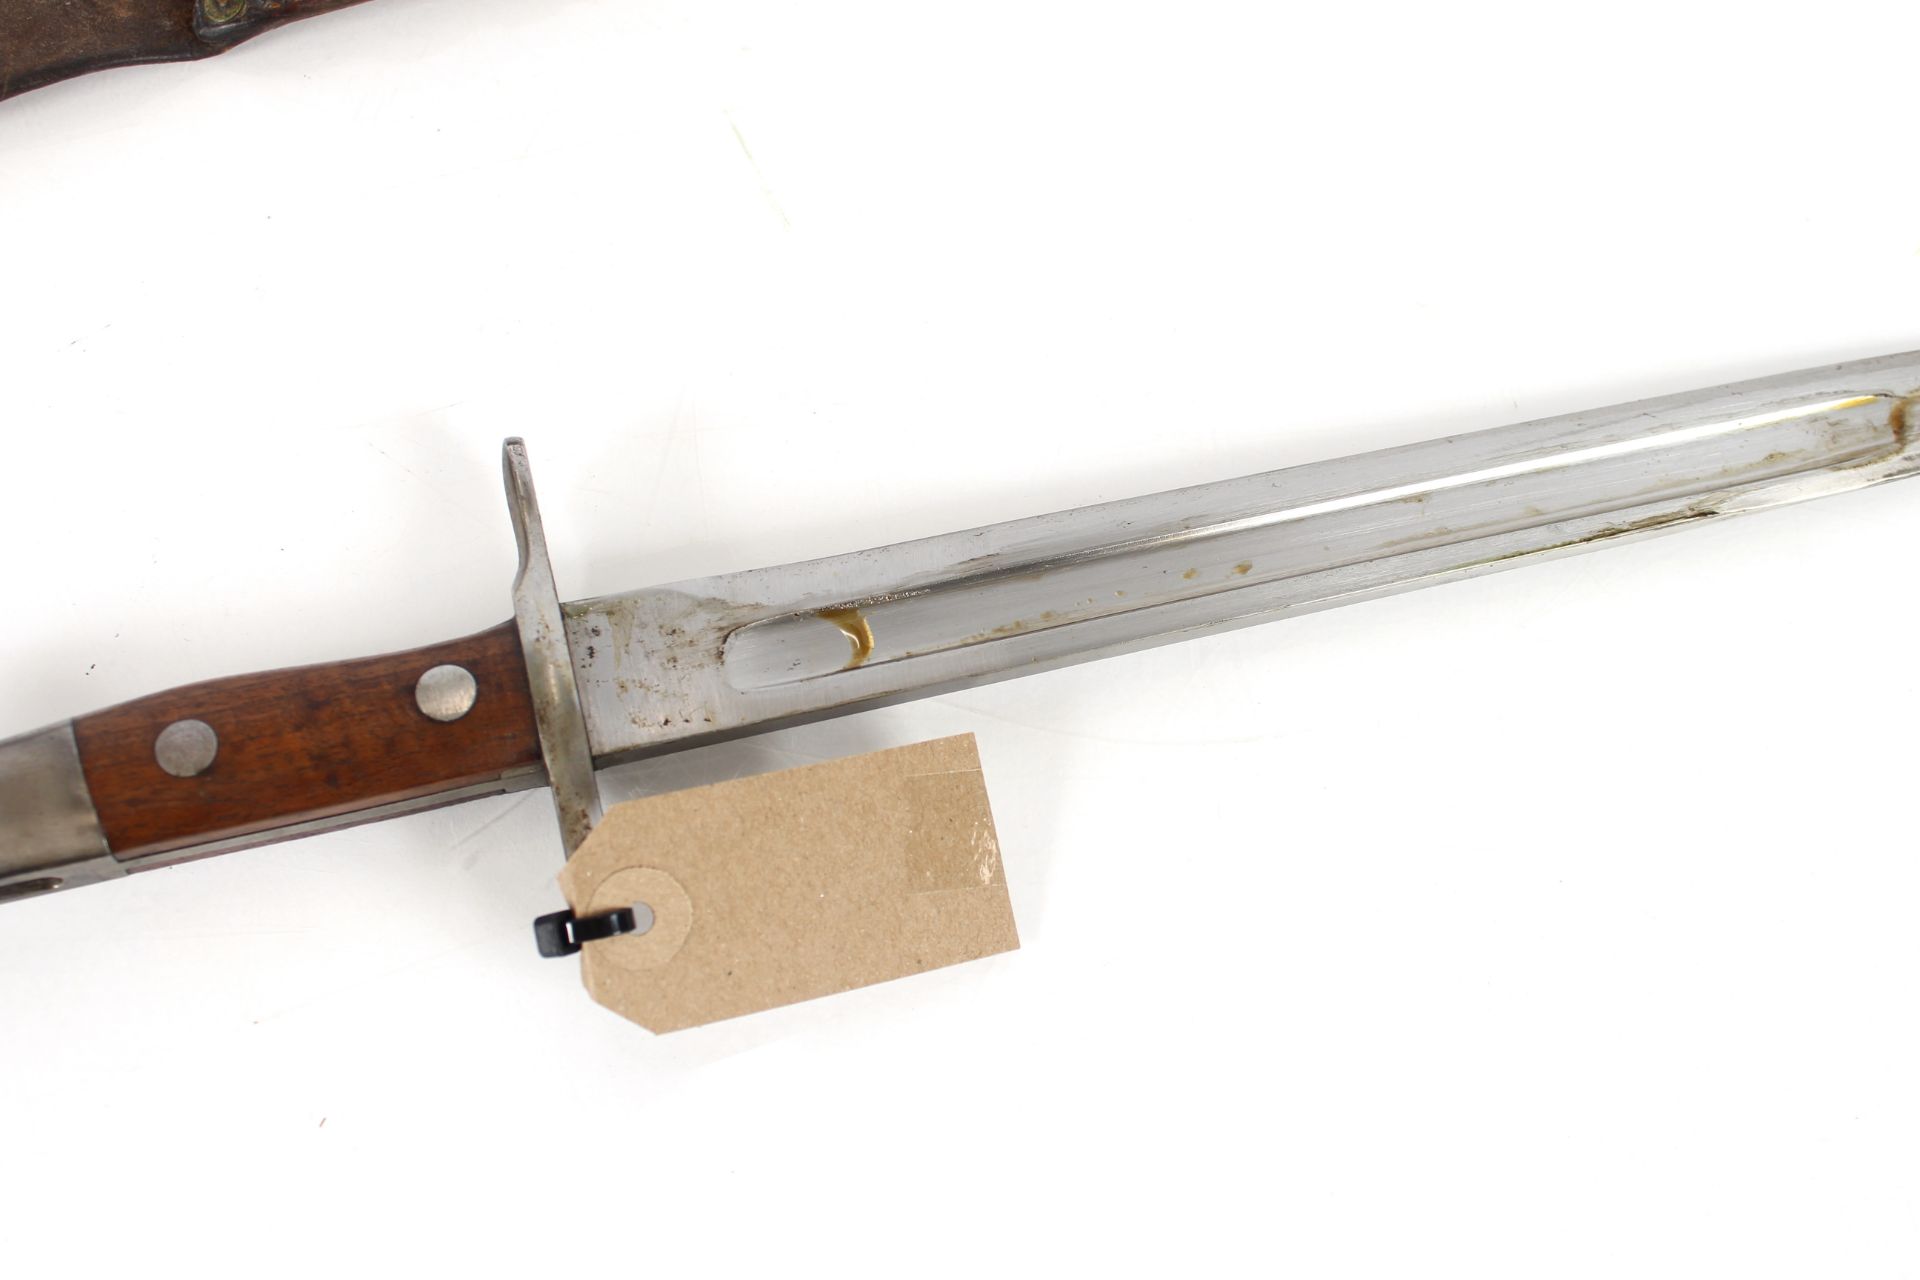 A Swiss model 1889 bayonet (Scmidt-Rubin) with sca - Image 6 of 11